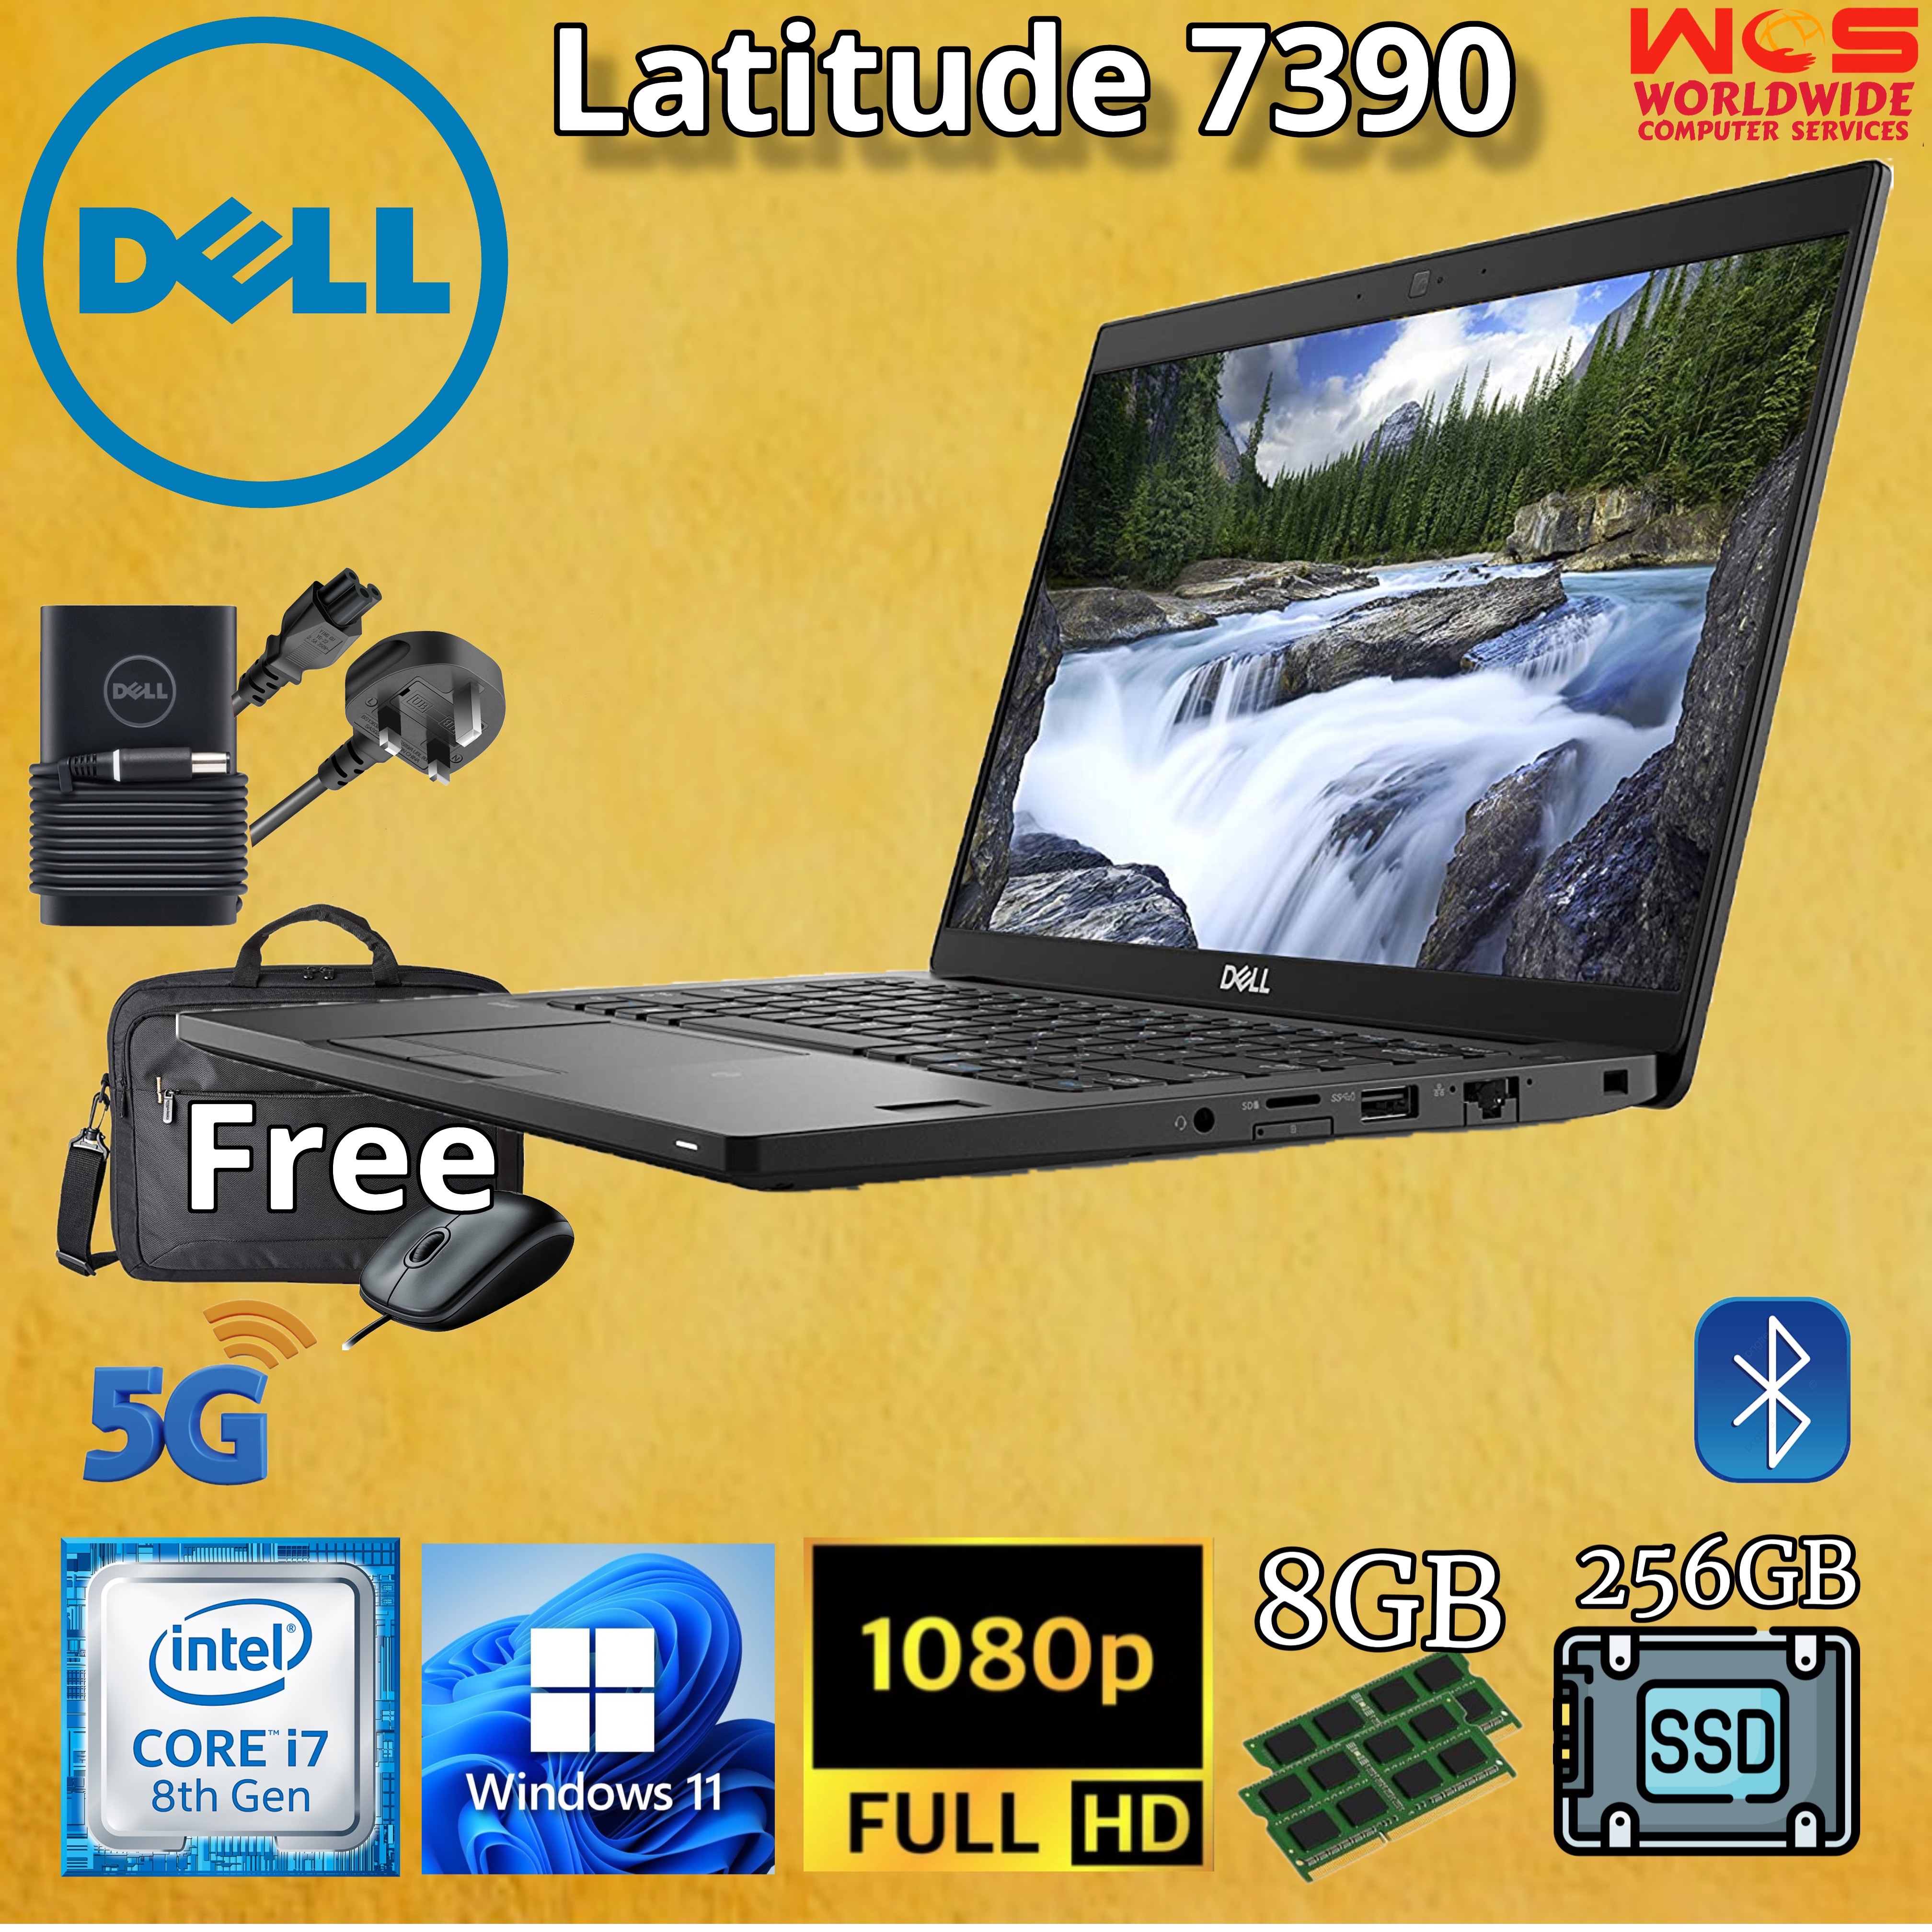 DELL LATITUDE 7390, 2 in 1 Refurbished Laptop 13.3